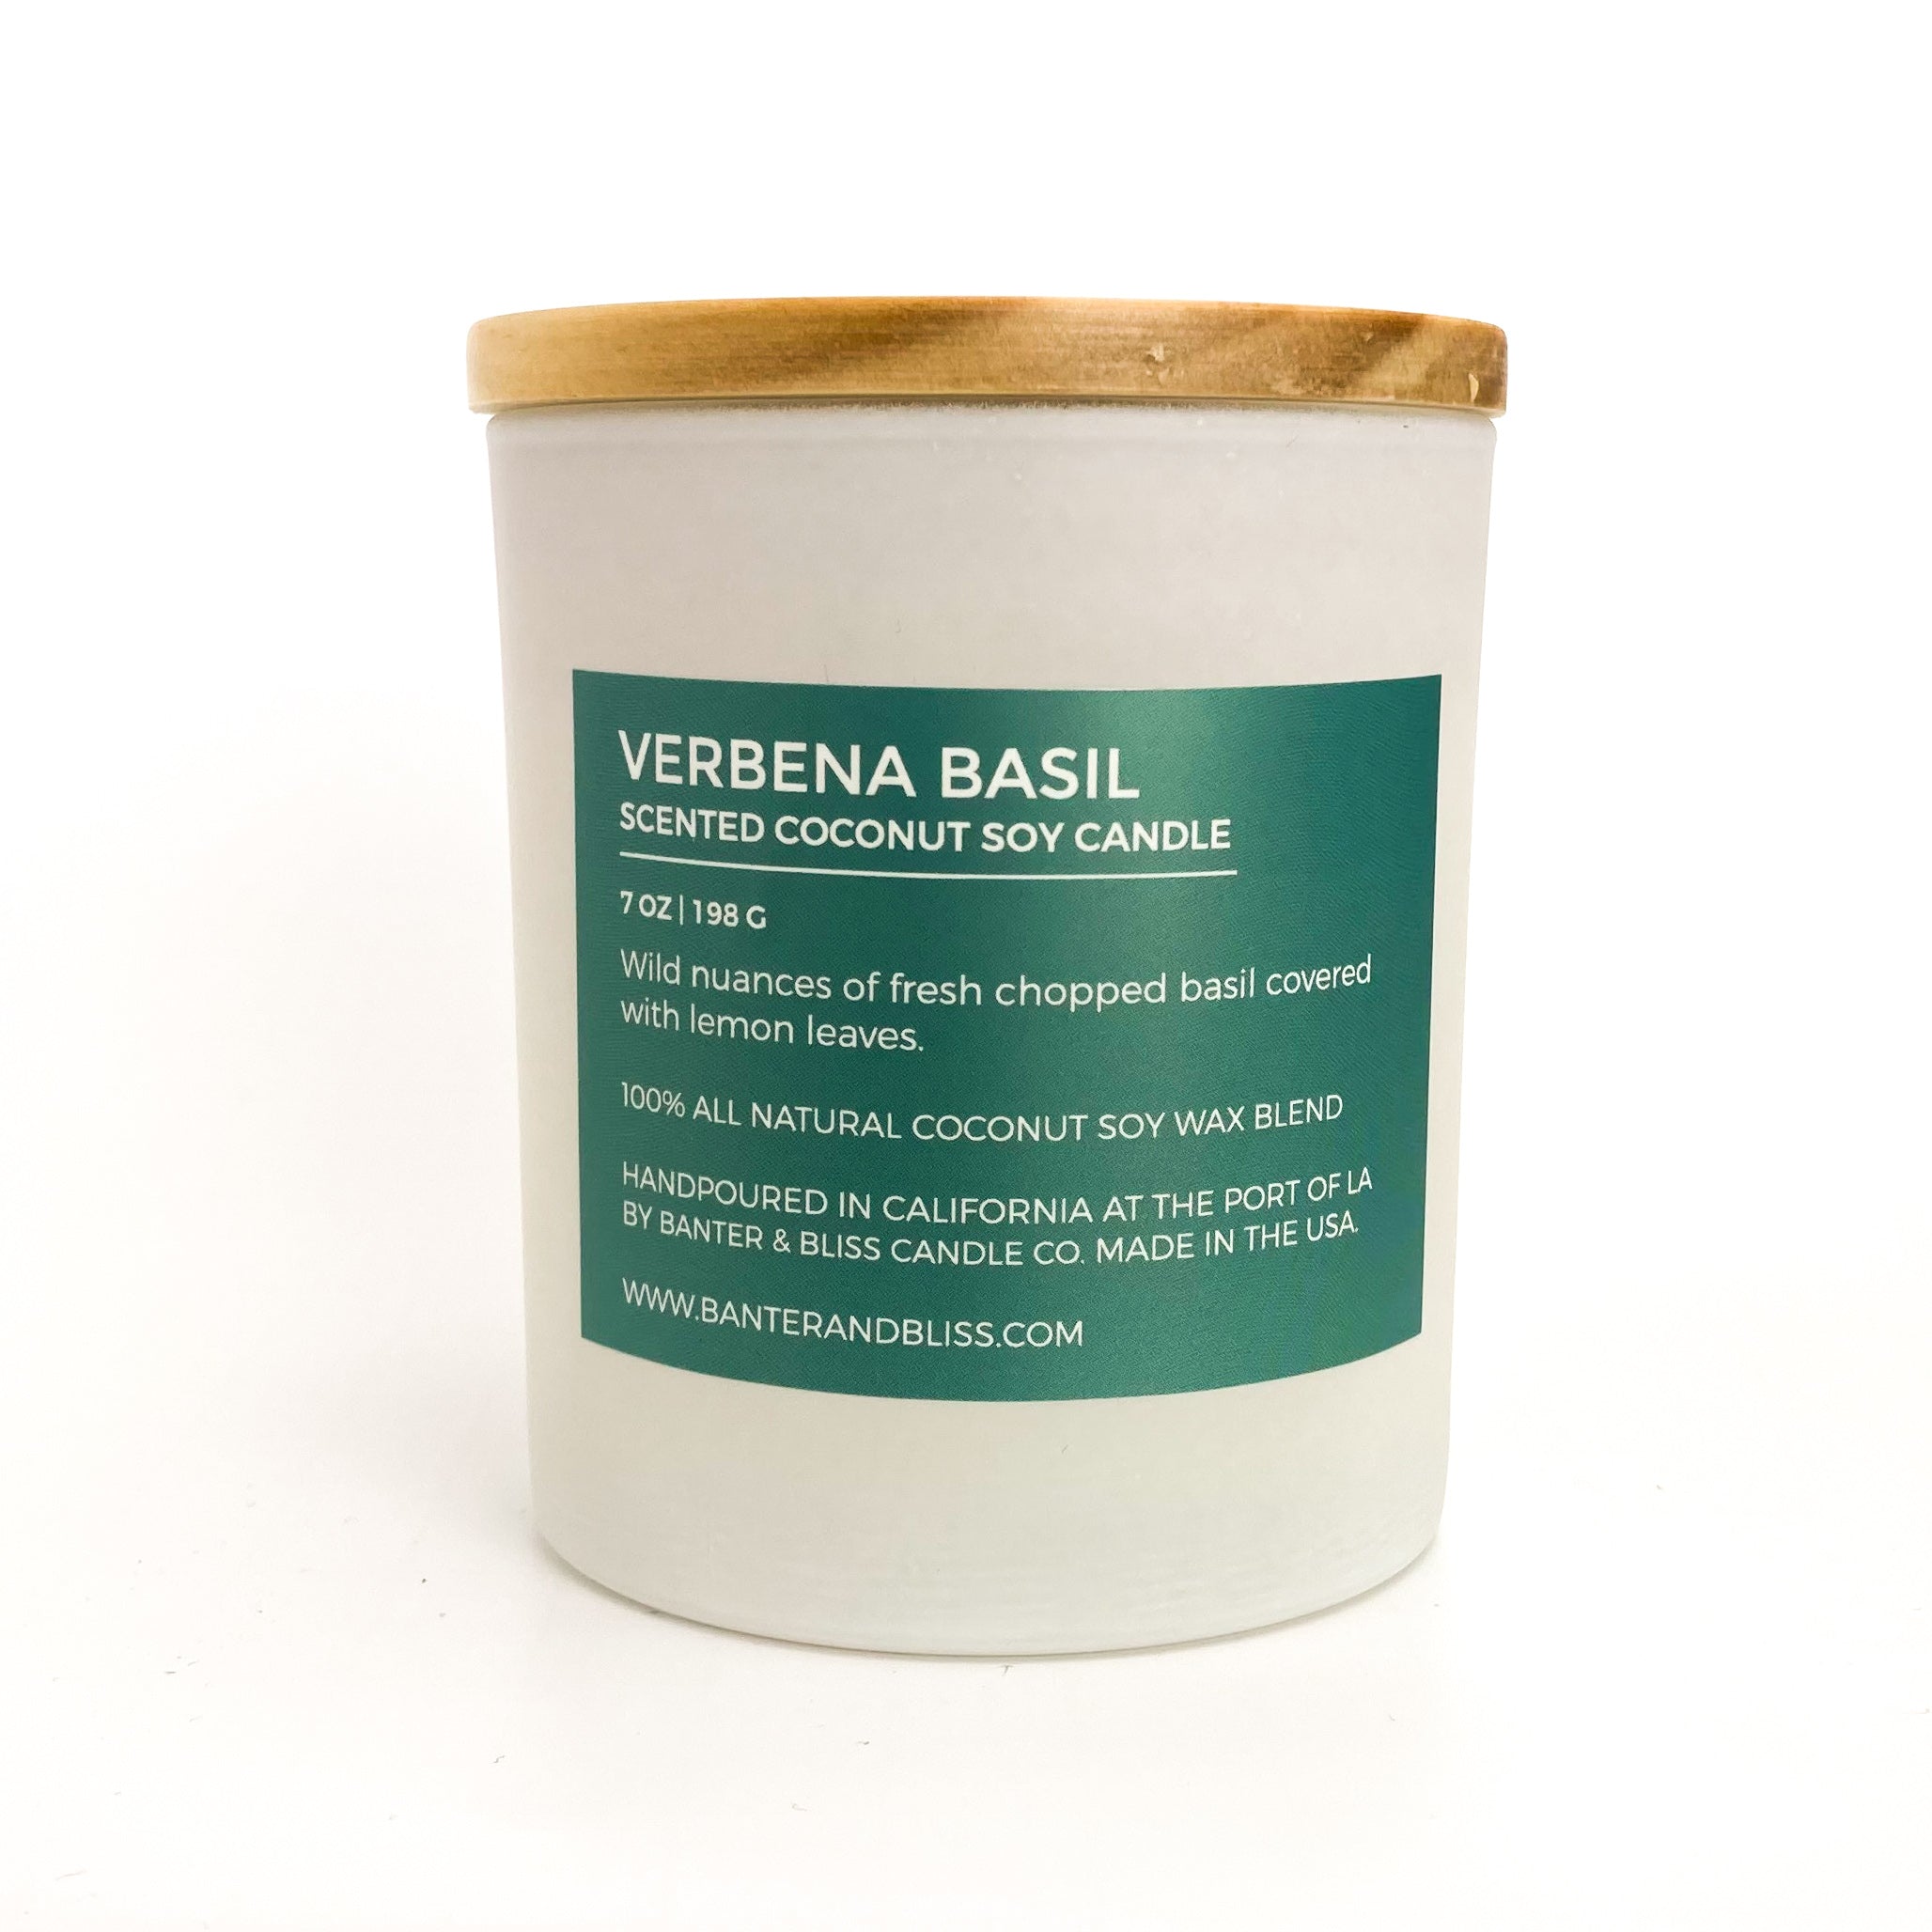 Verbena Basil. 7 oz. Scented Coconut Soy Candle.